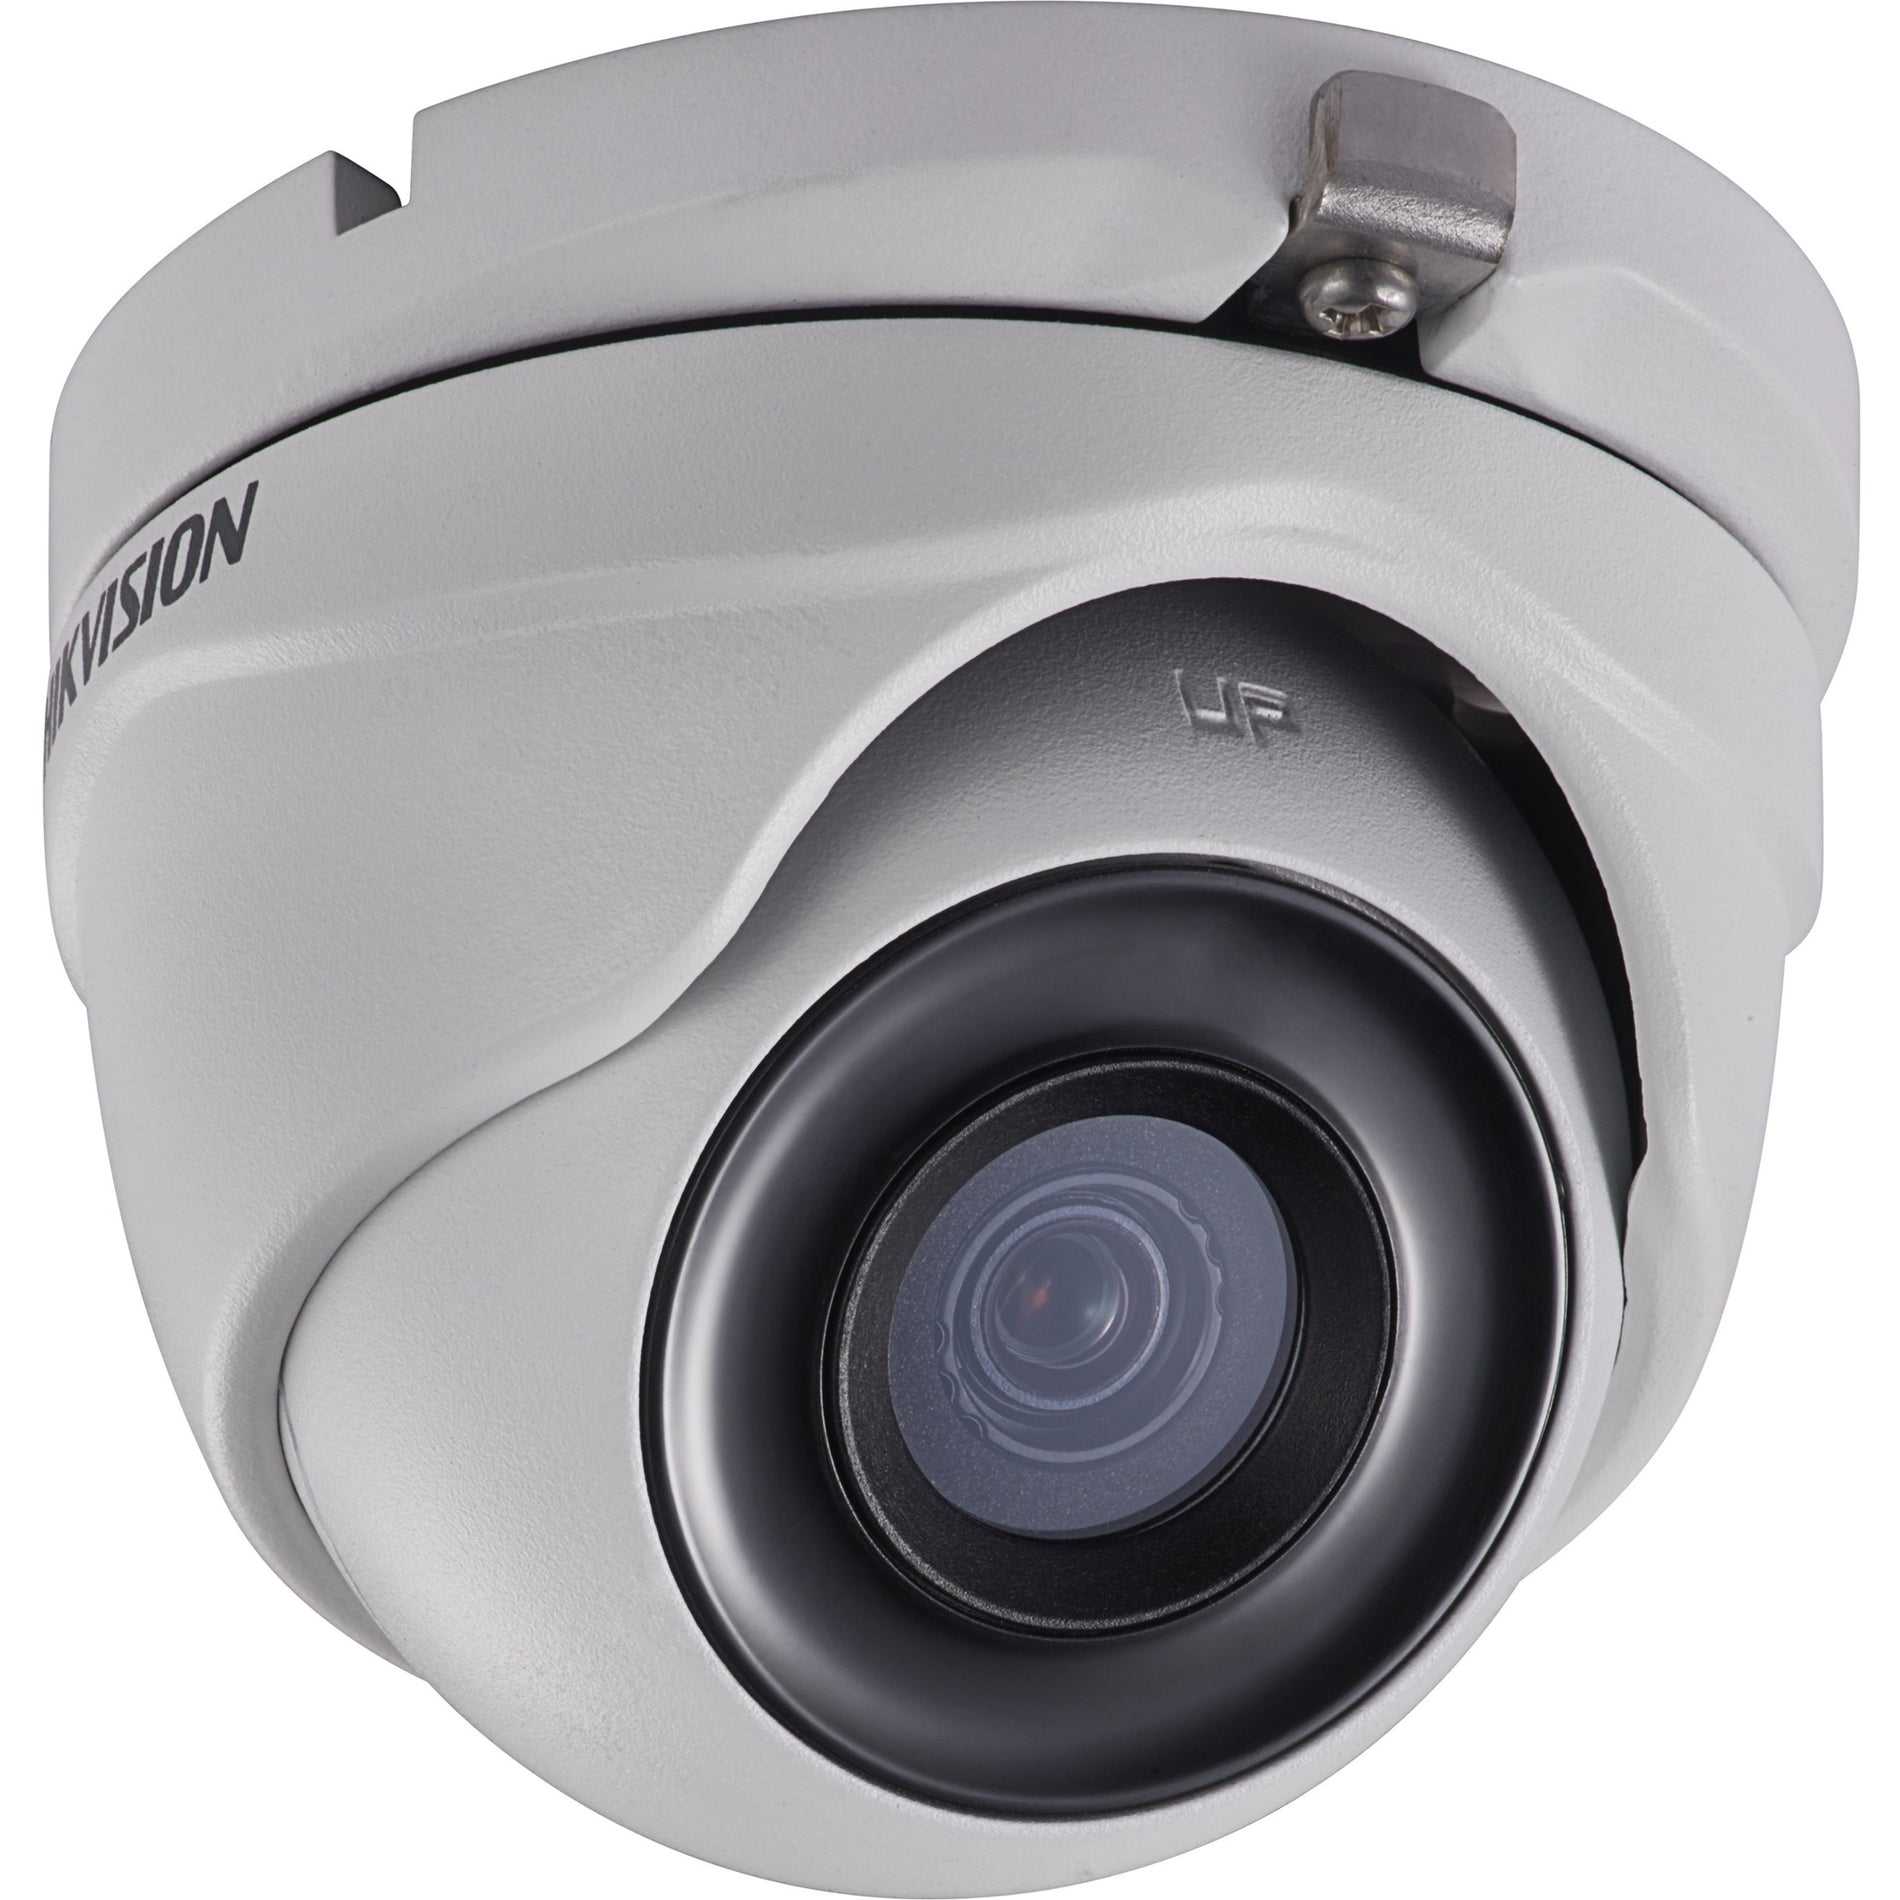 Hikvision DS-2CE76D3T-ITMF 3.6MM 2 MP Outdoor Ultra-Low Light Turret Camera, 3.6mm Lens, 30m IR, WDR, IP67